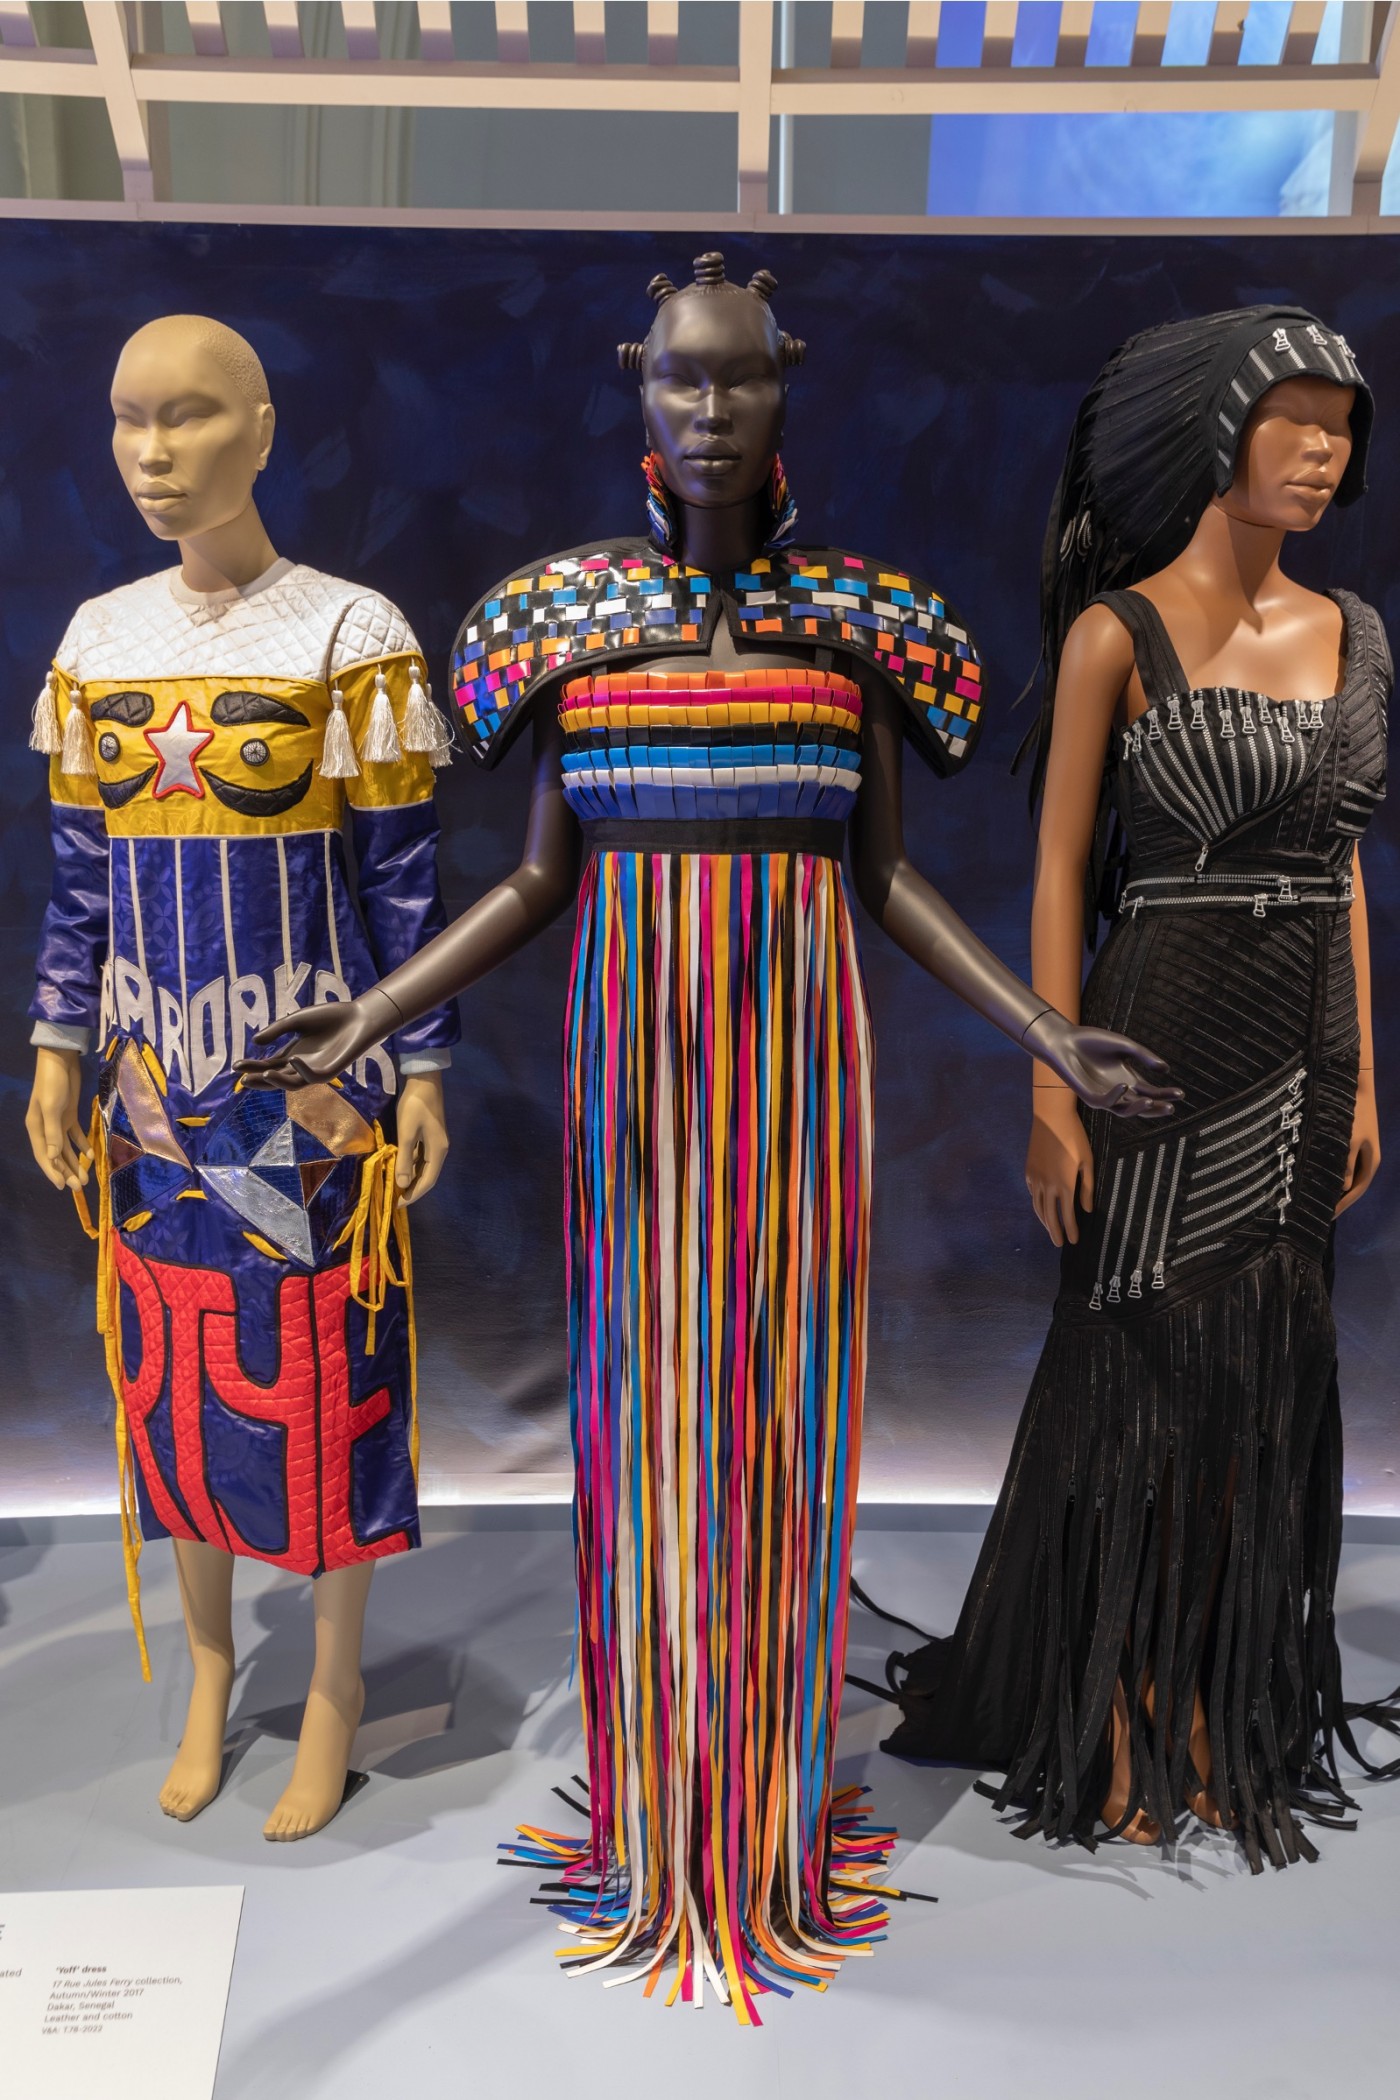 Inside the Africa Fashion exhibition · V&A